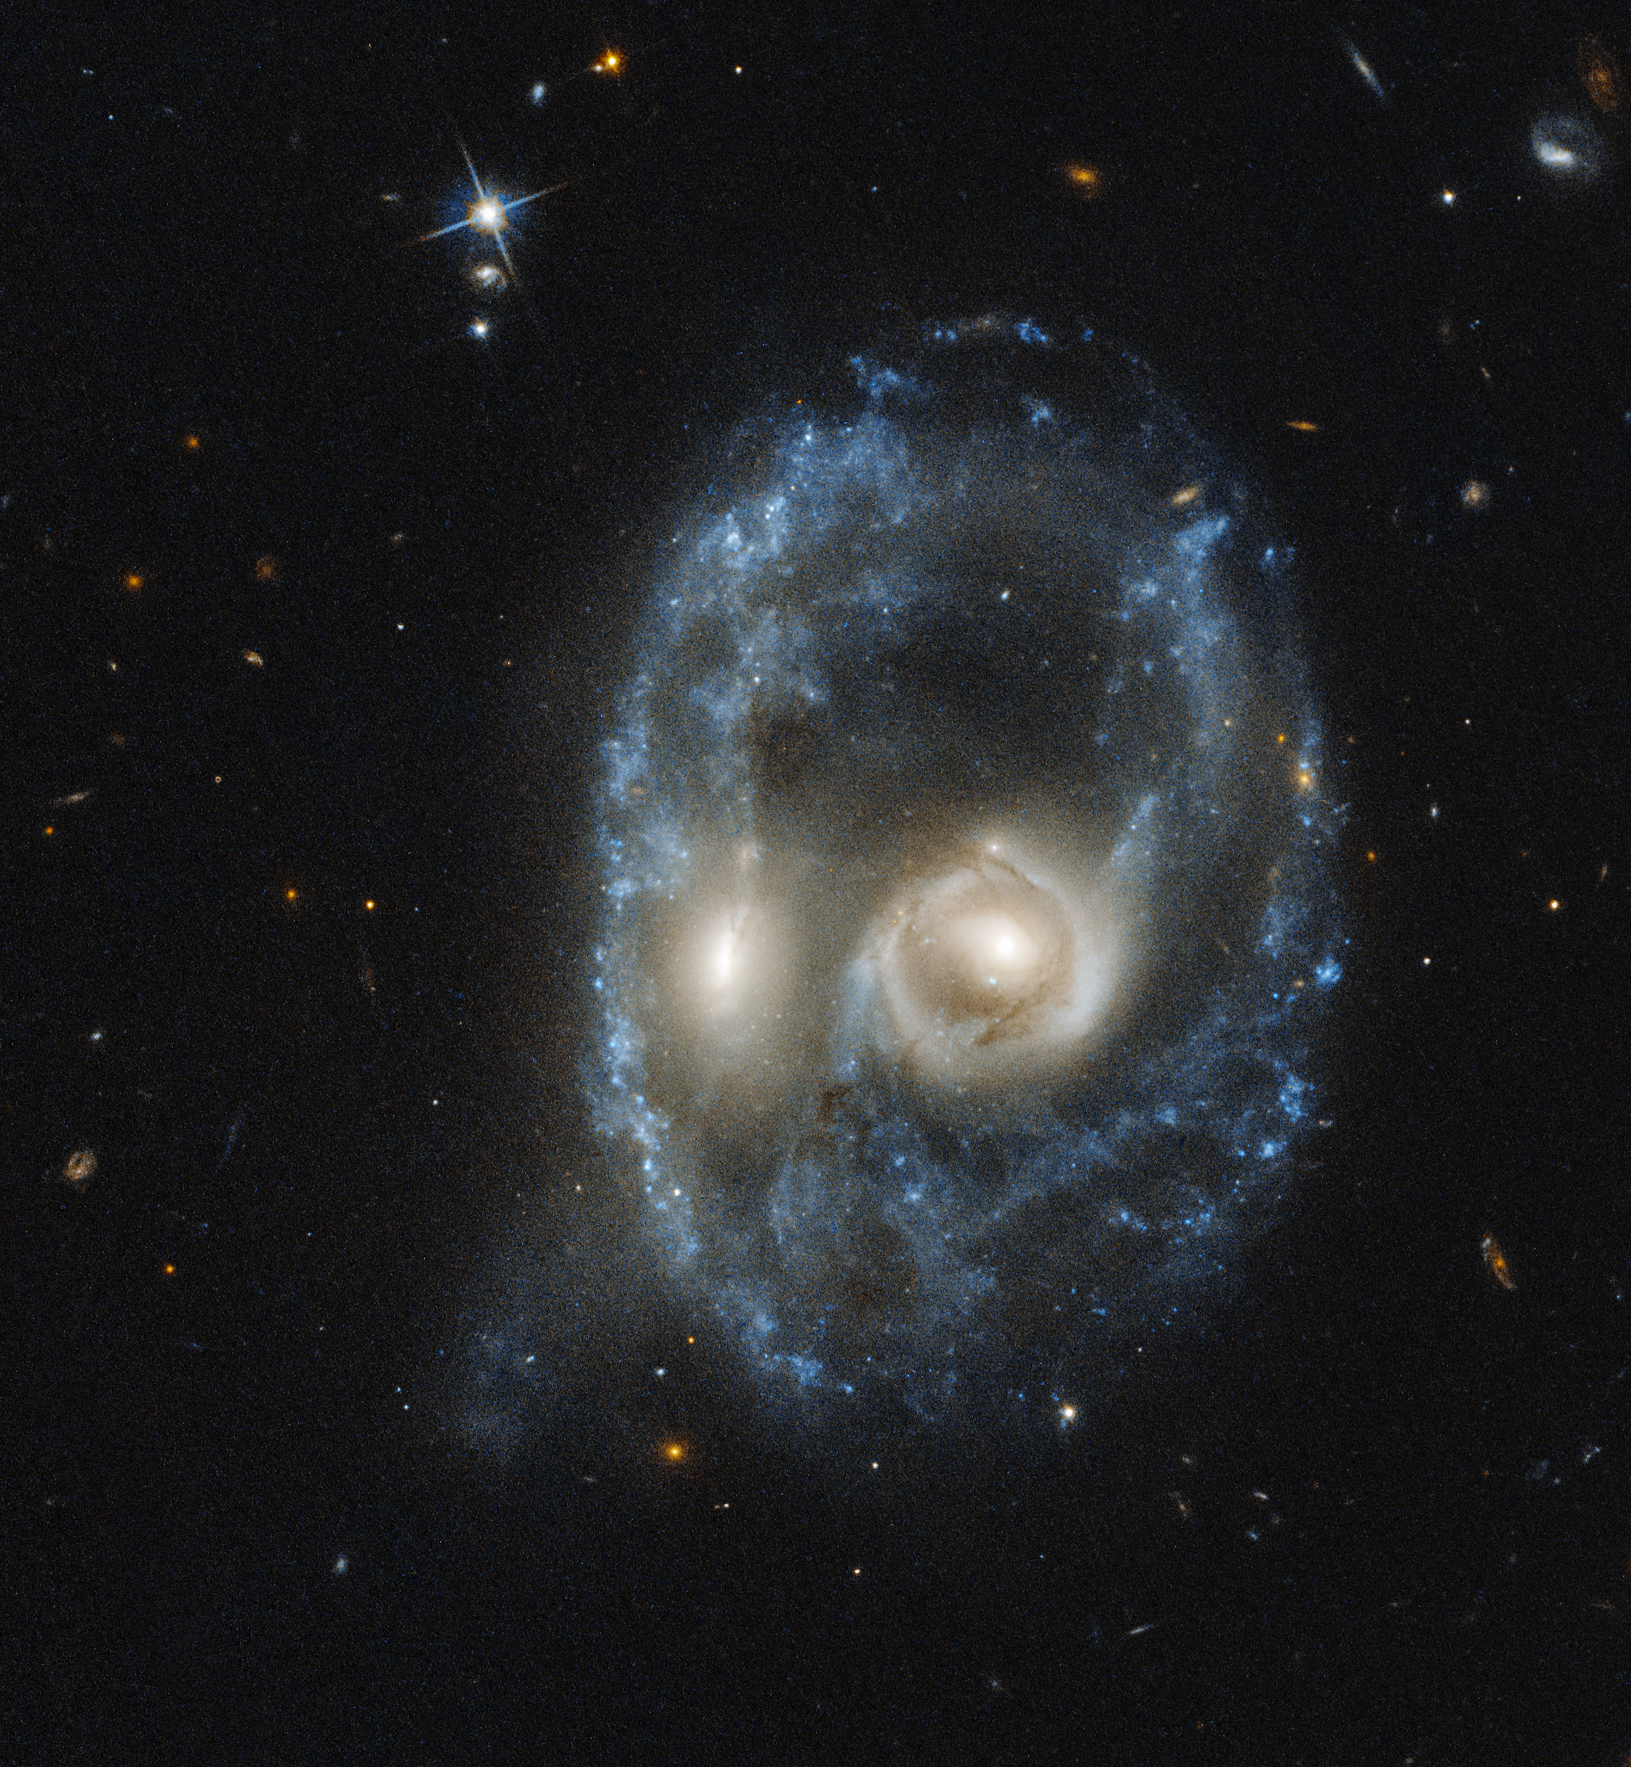 Two galaxies, each has a bright-white core. Their cores are very close together. They are surrounded by light blue gas, dust, and stars that form a ring around the cores.